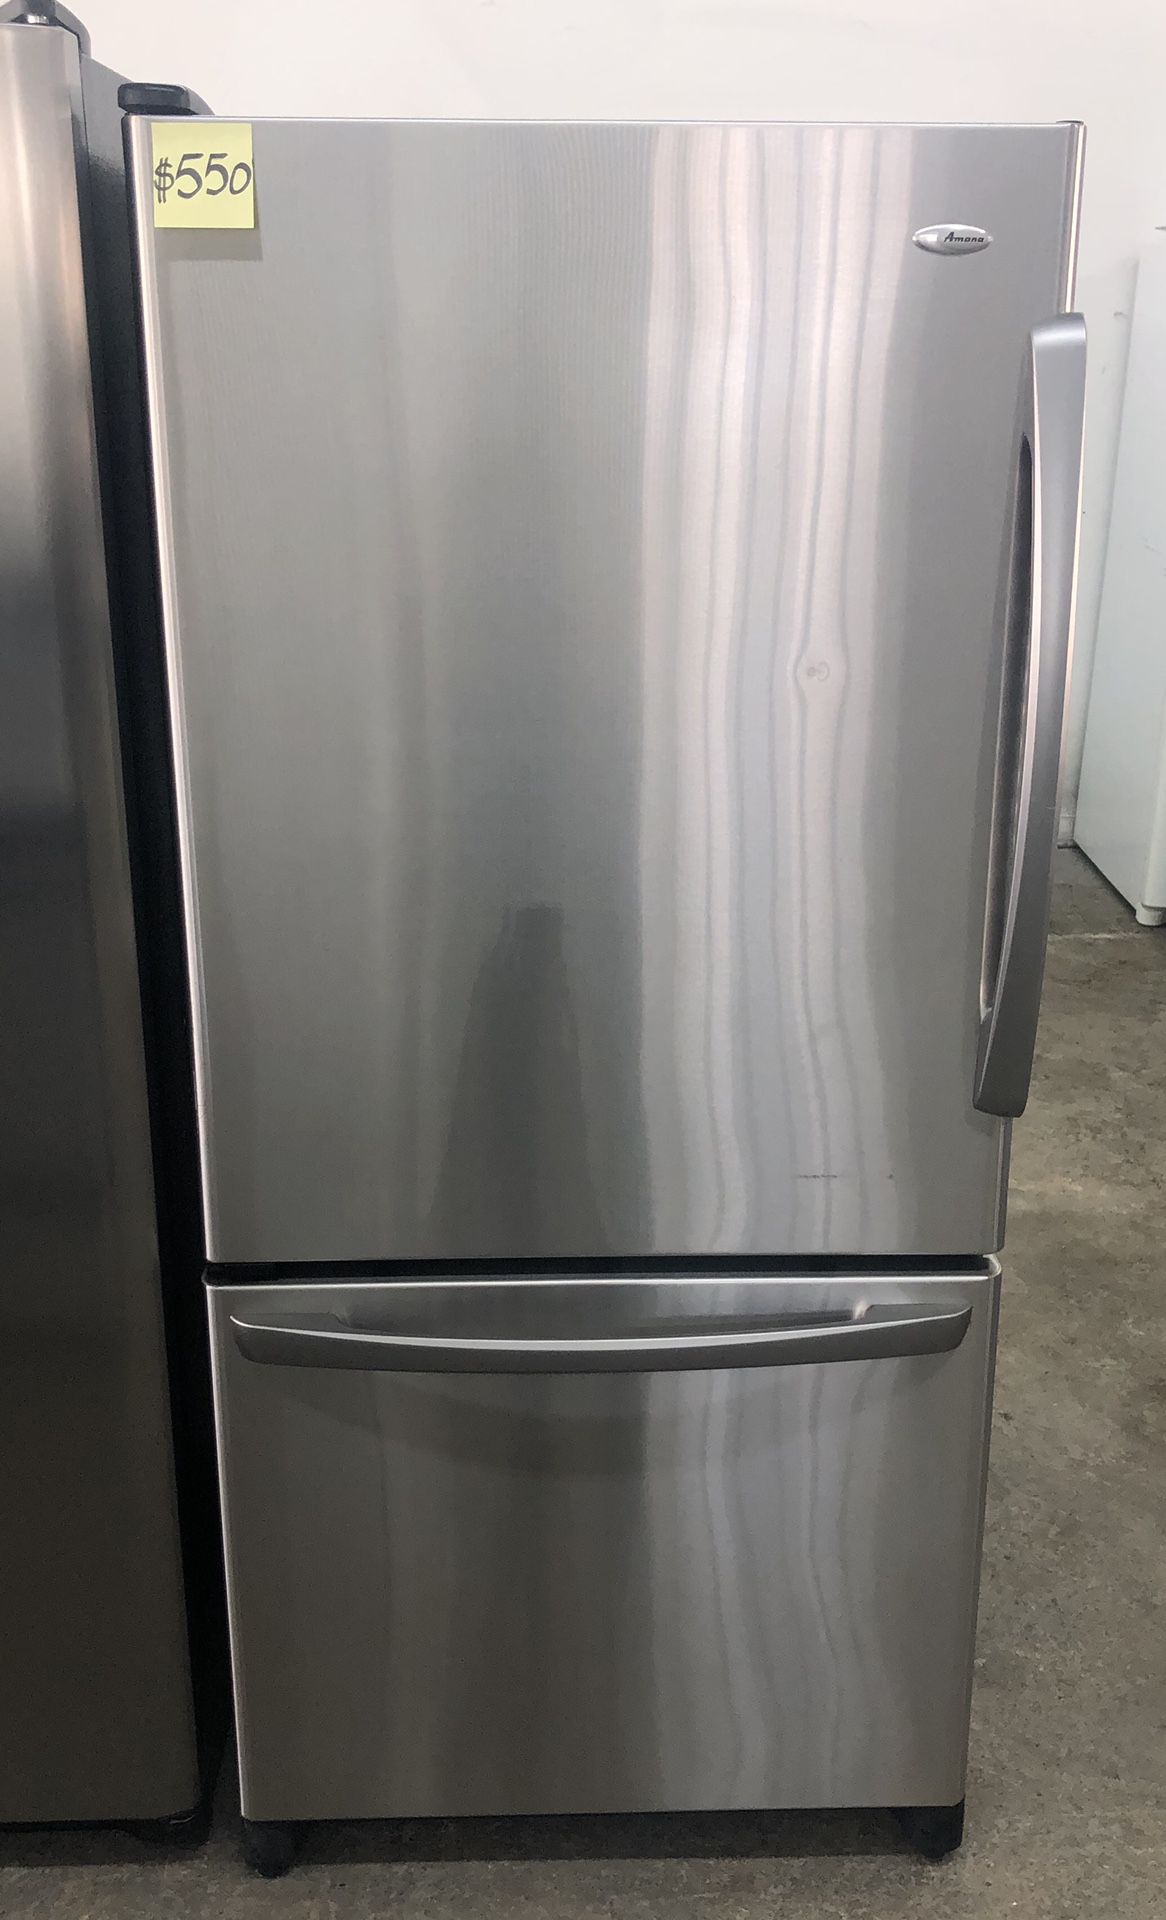 Comes with free 6 Months Warranty-like new 29 5/8” wide bottom freezer stainless Amana